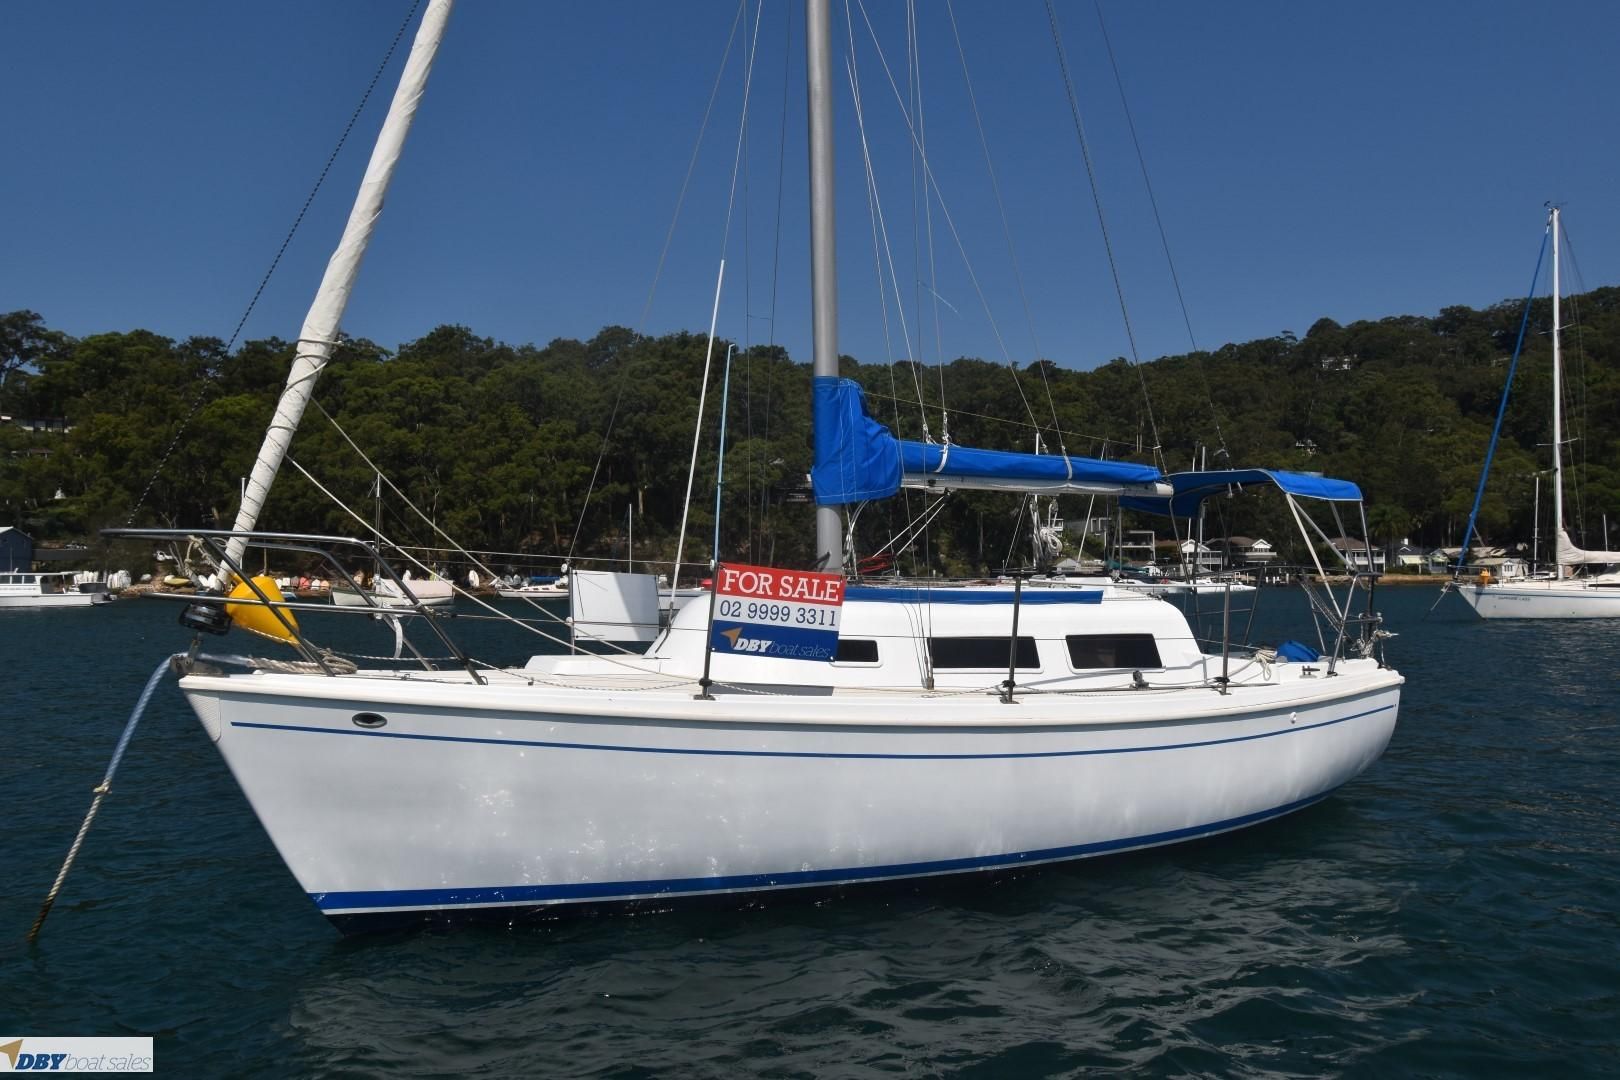 spacesailer 24 yacht for sale